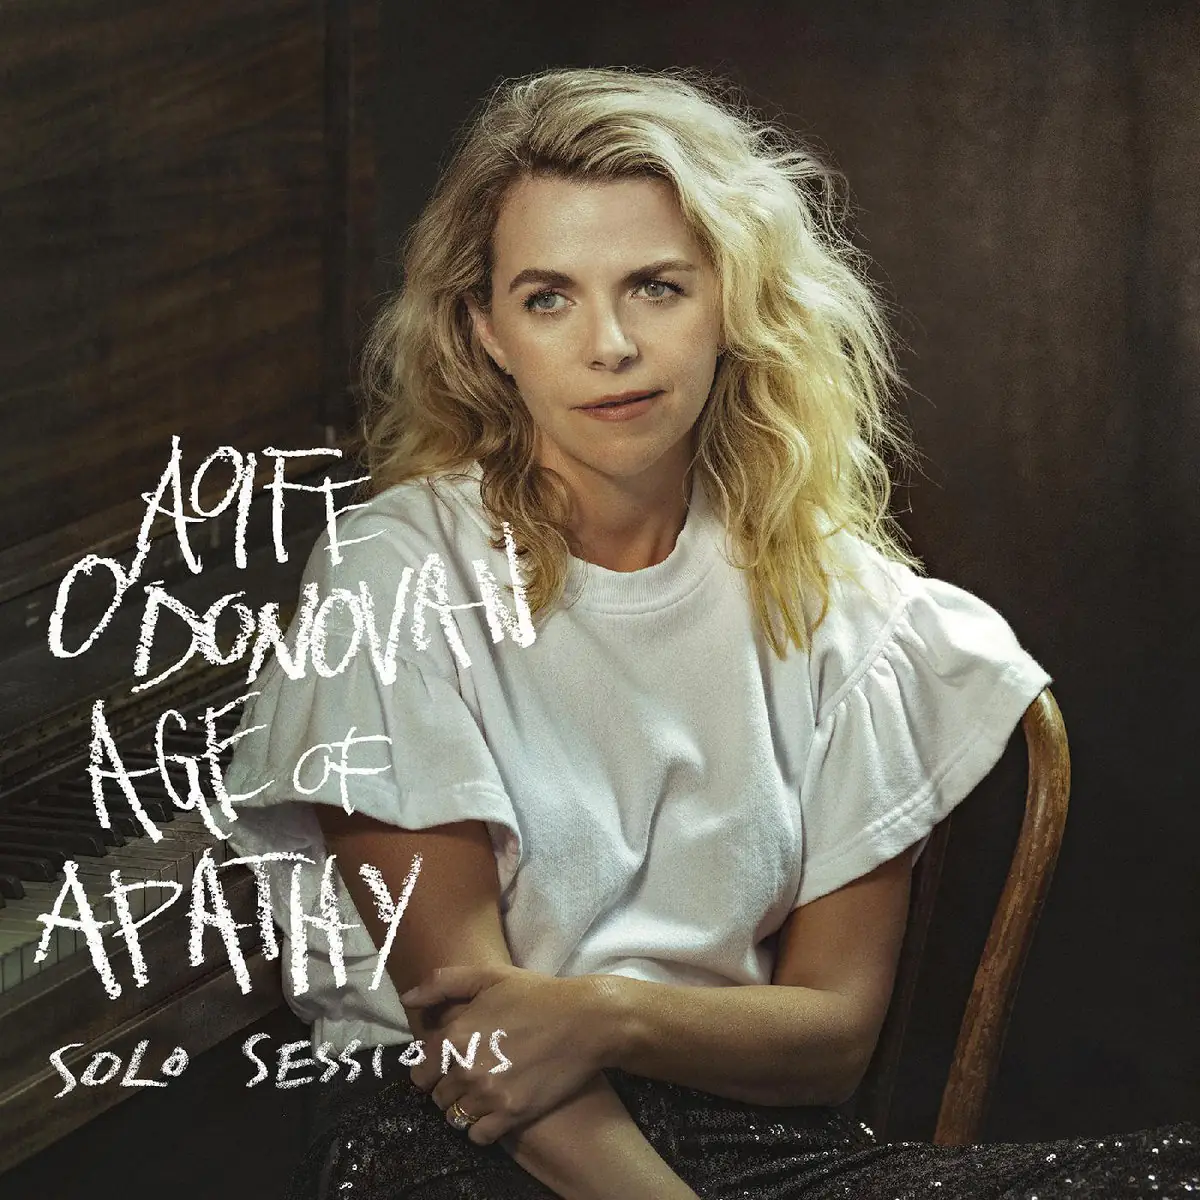 ALBUM REVIEW: Aoife O’Donovan – Age of Apathy Solo Sessions